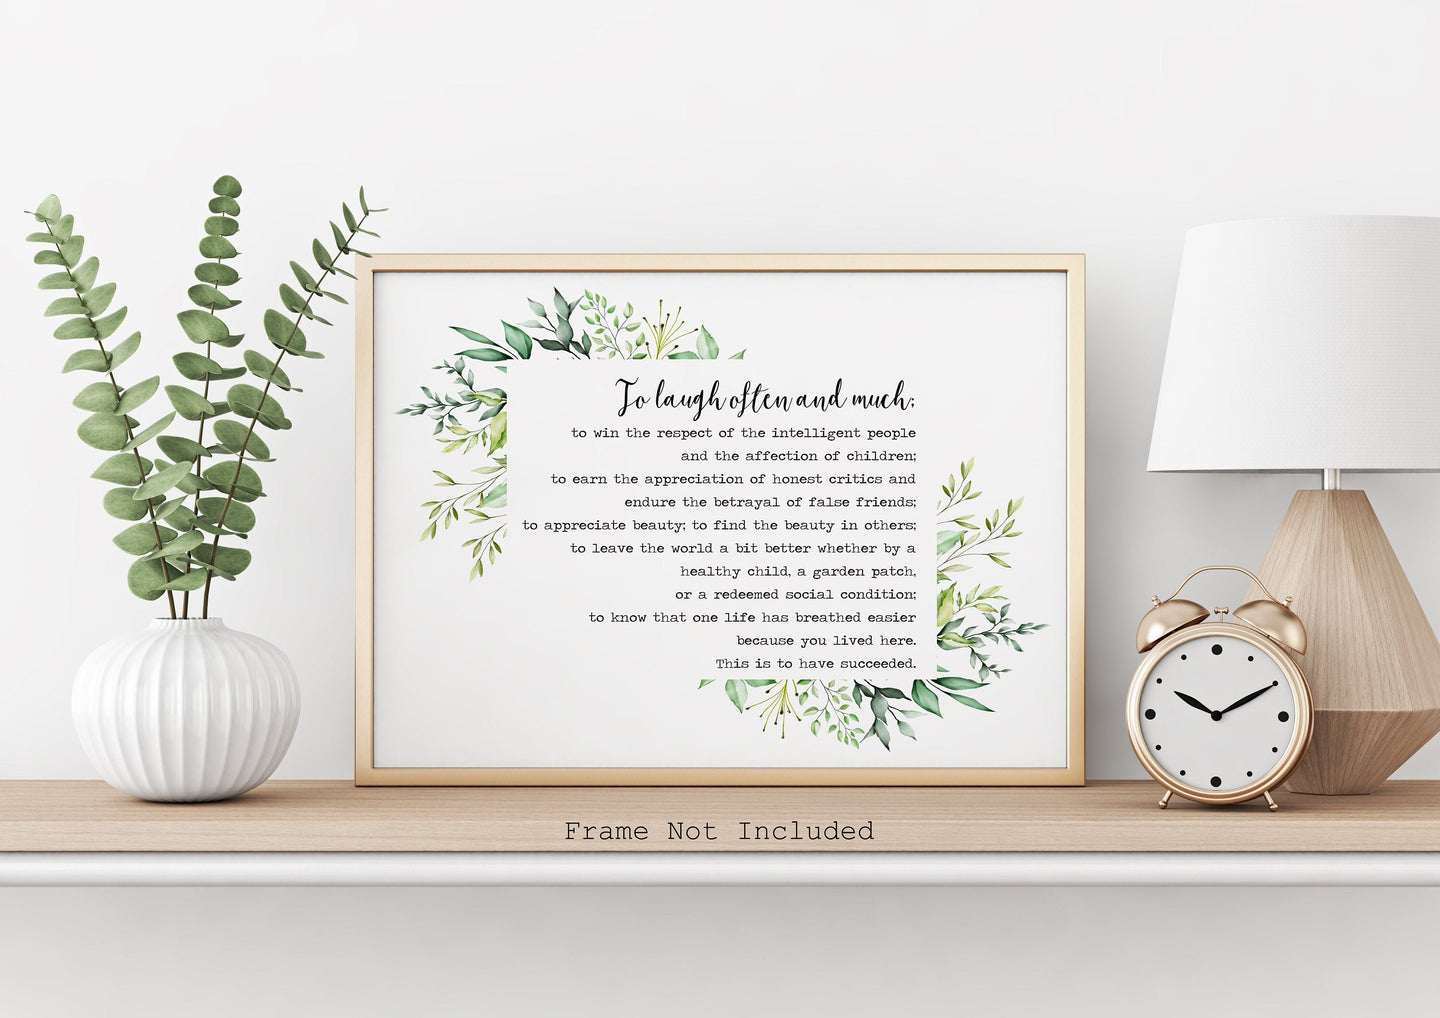 To Laugh Often and Much Ralph Waldo Emerson Quote - This is to have succeeded - Horizontal Print for library decor office Art dorm decor